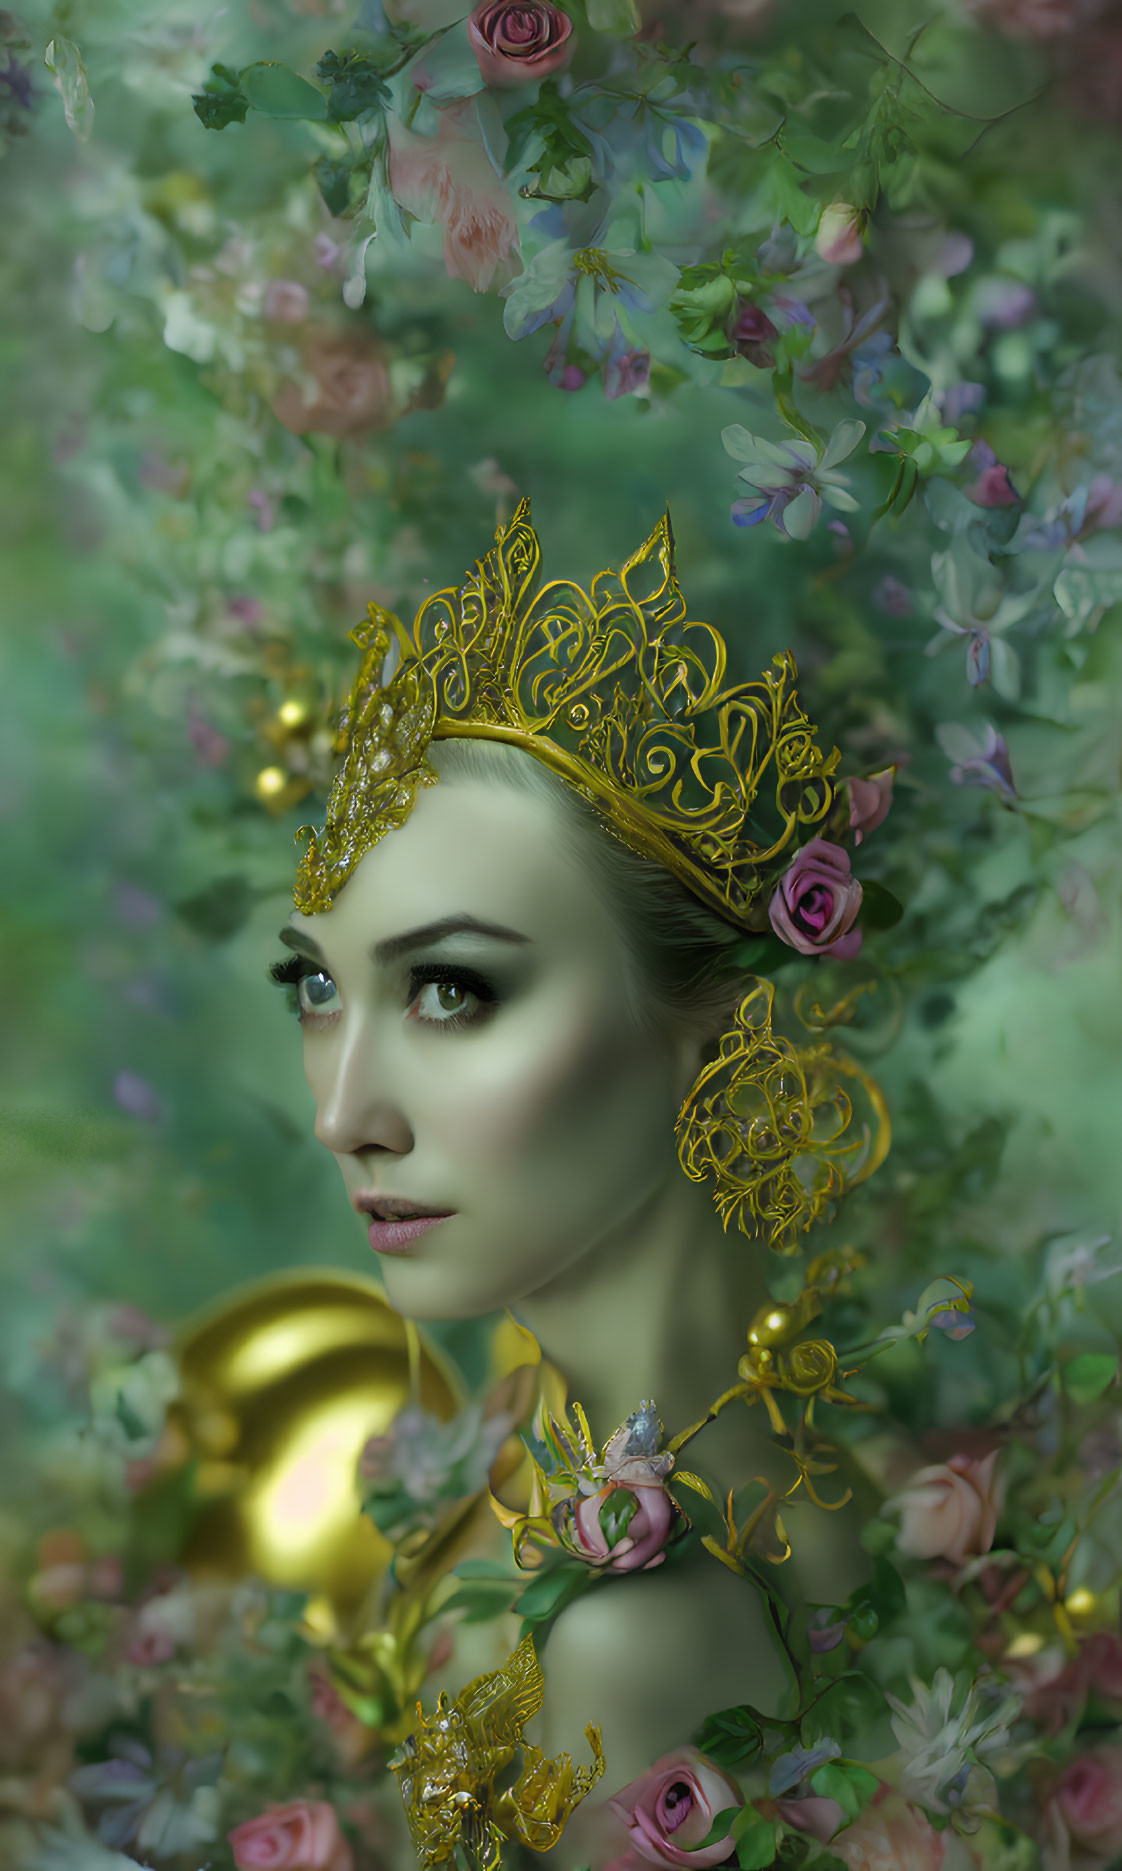 Woman with Golden Crown Surrounded by Greenery and Roses